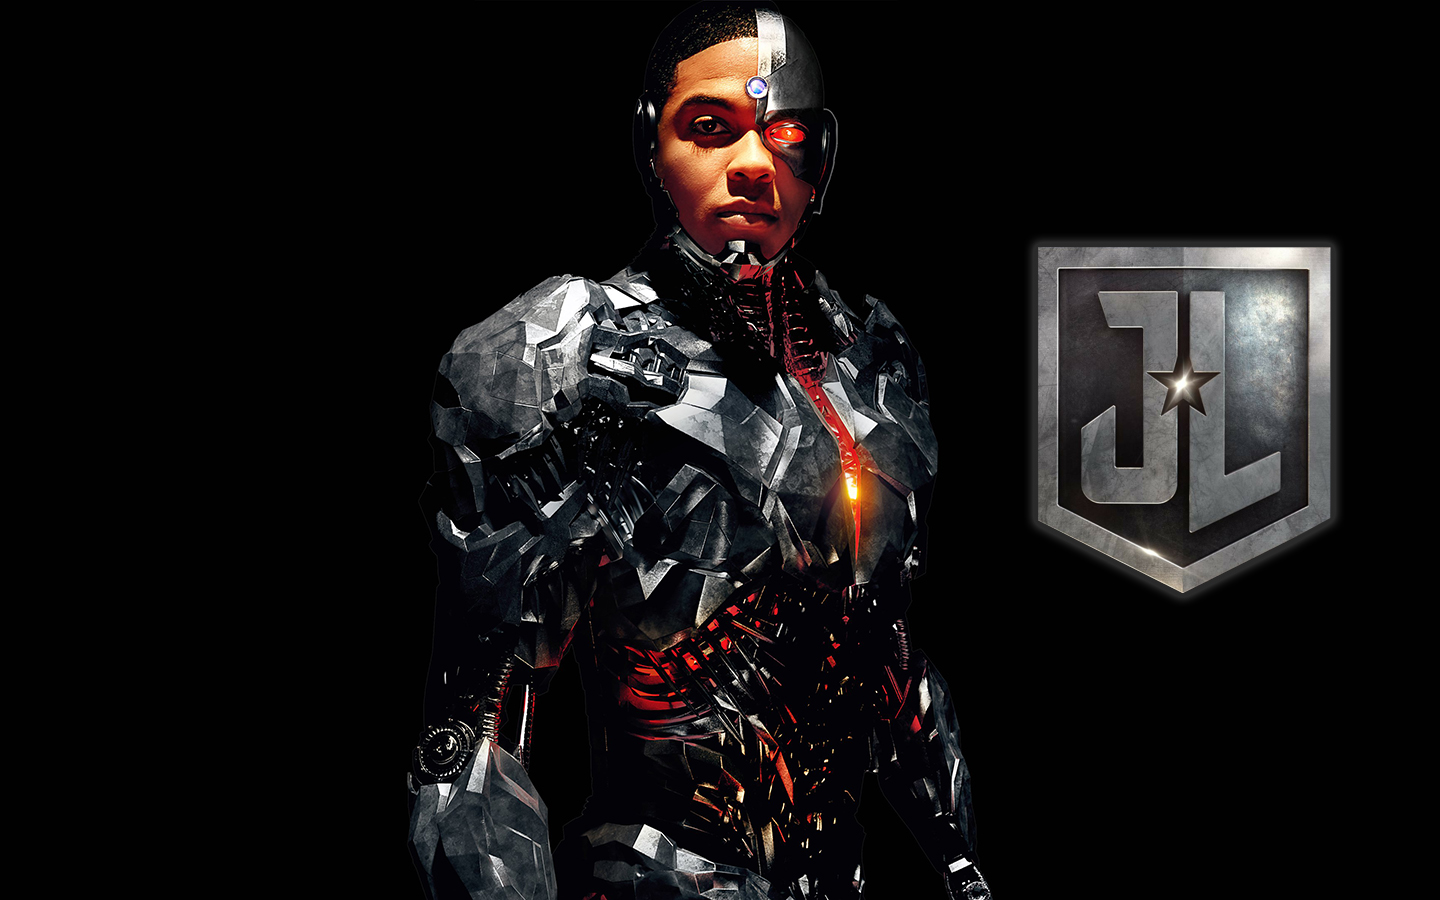 Cyborg’s Origin Story in ‘Justice League’ to Differ From Comic Books